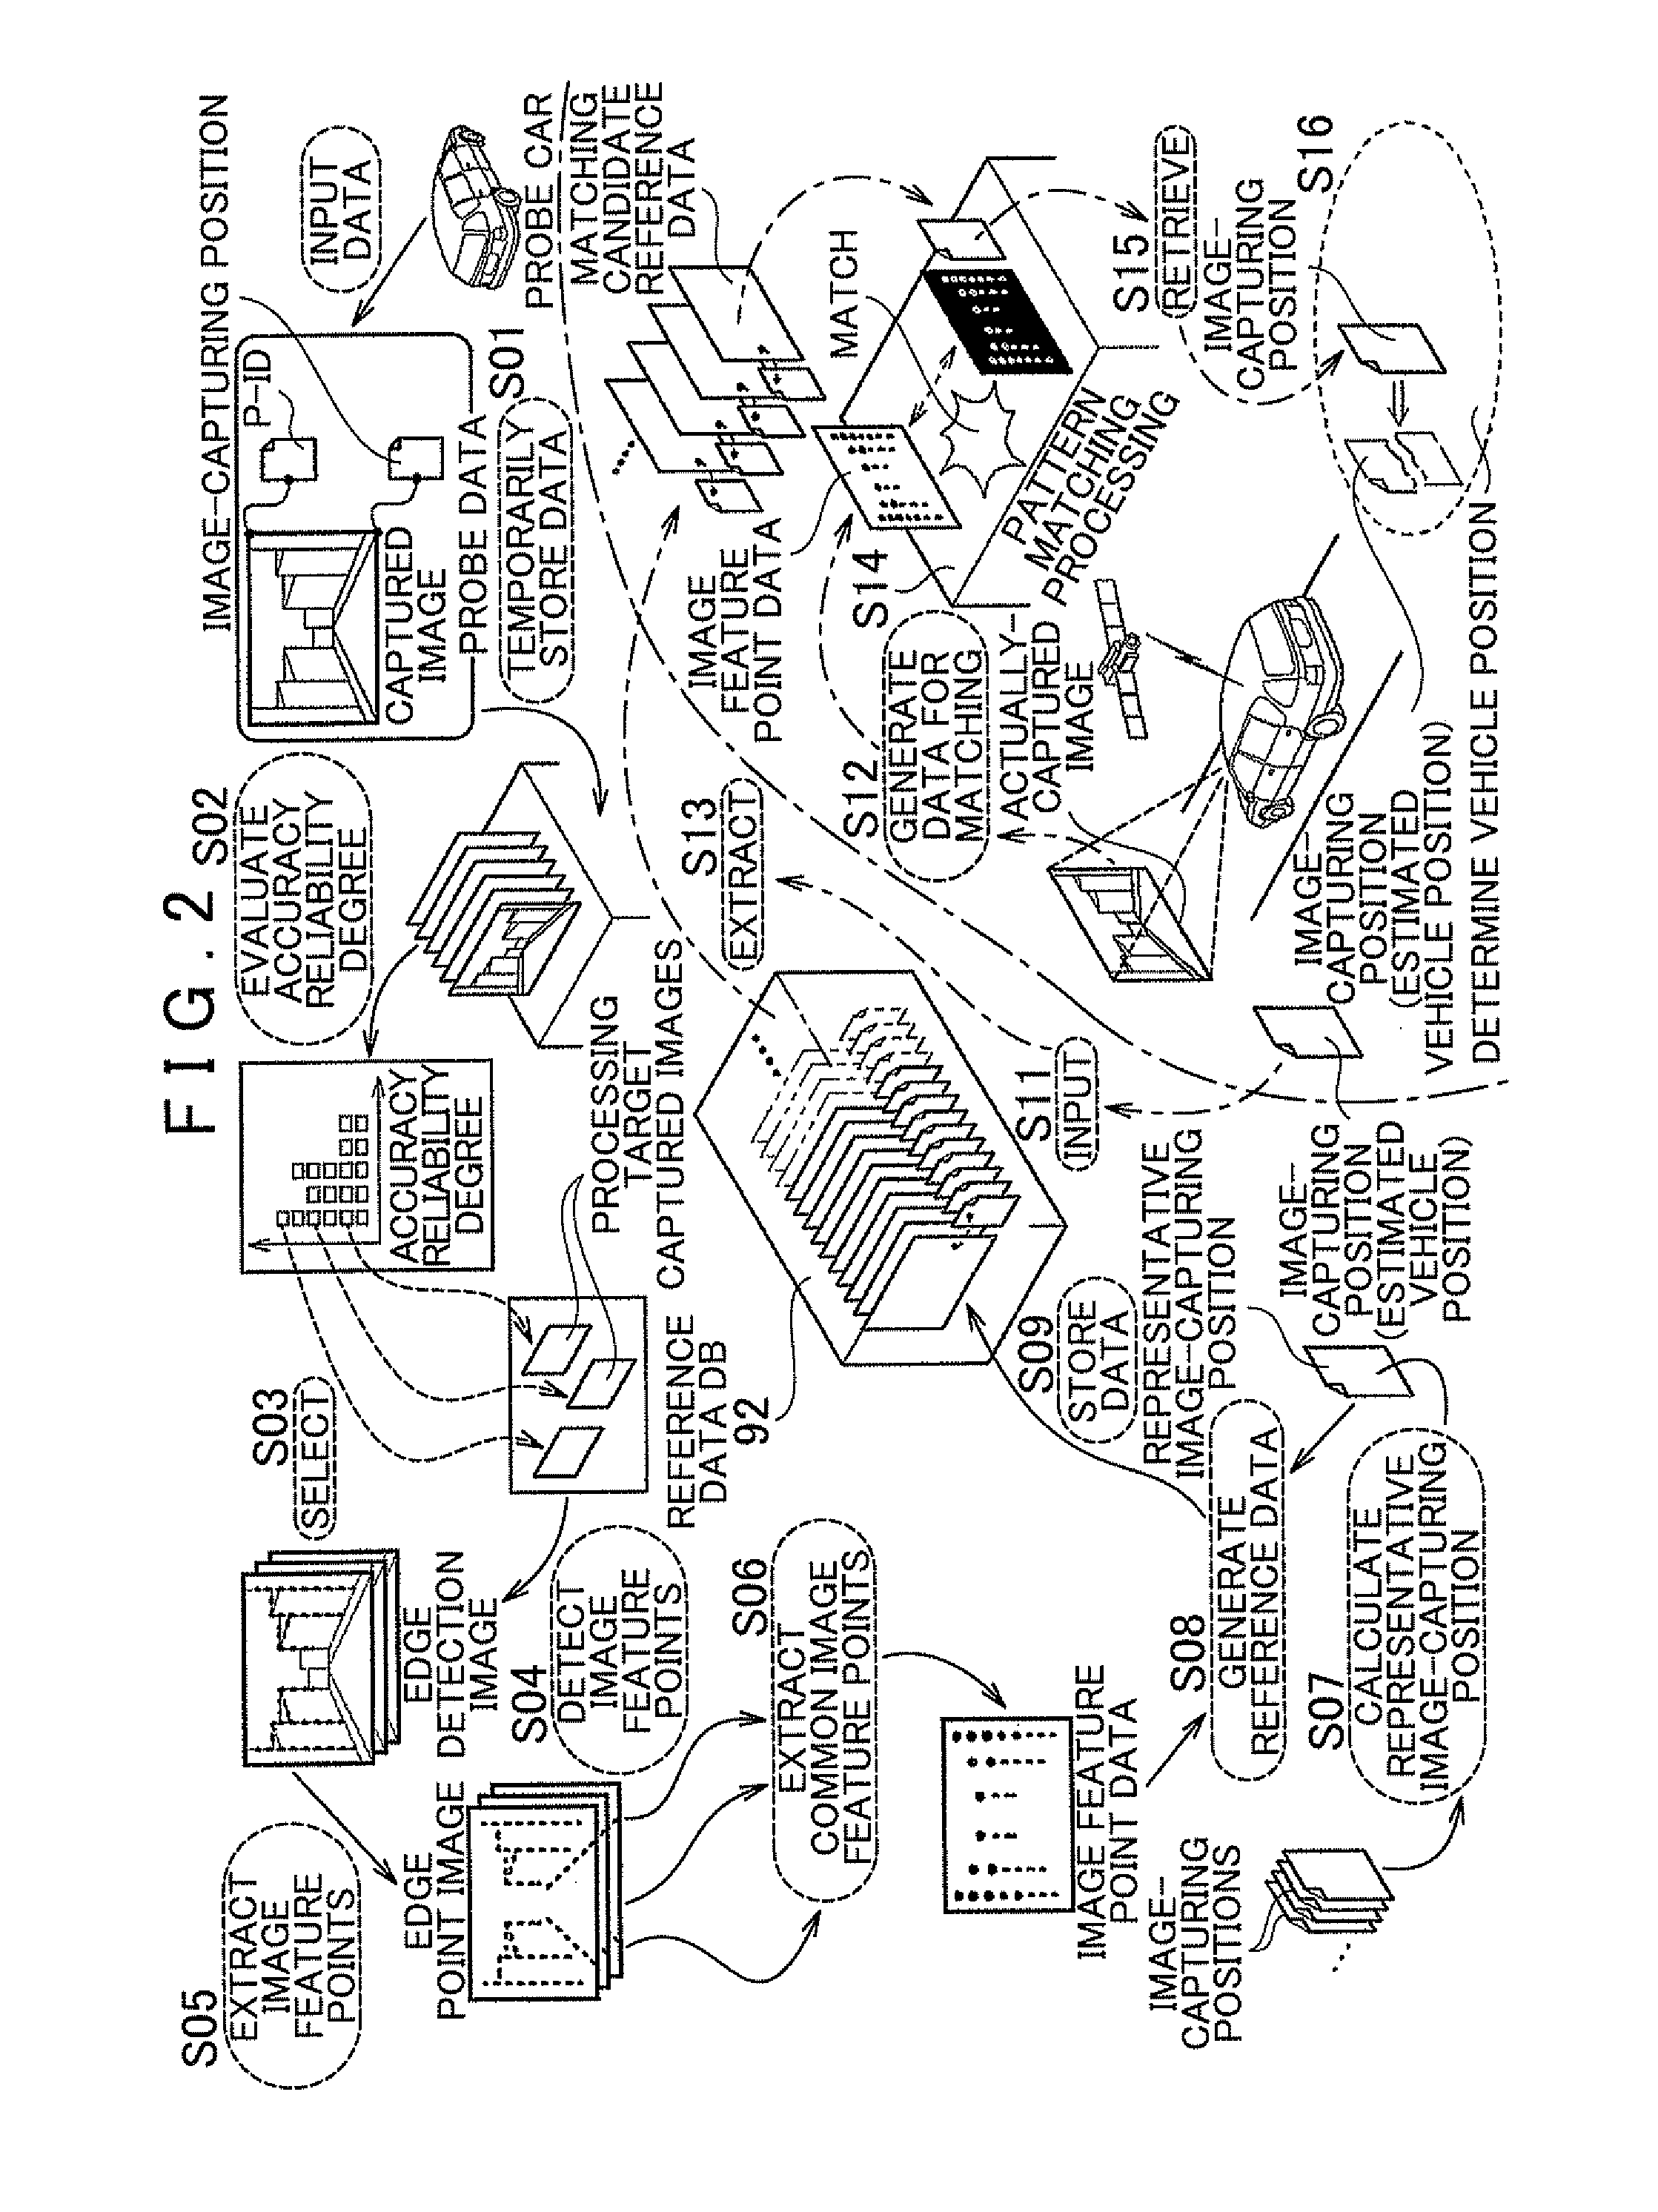 Scene matching reference data generation system and position measurement system